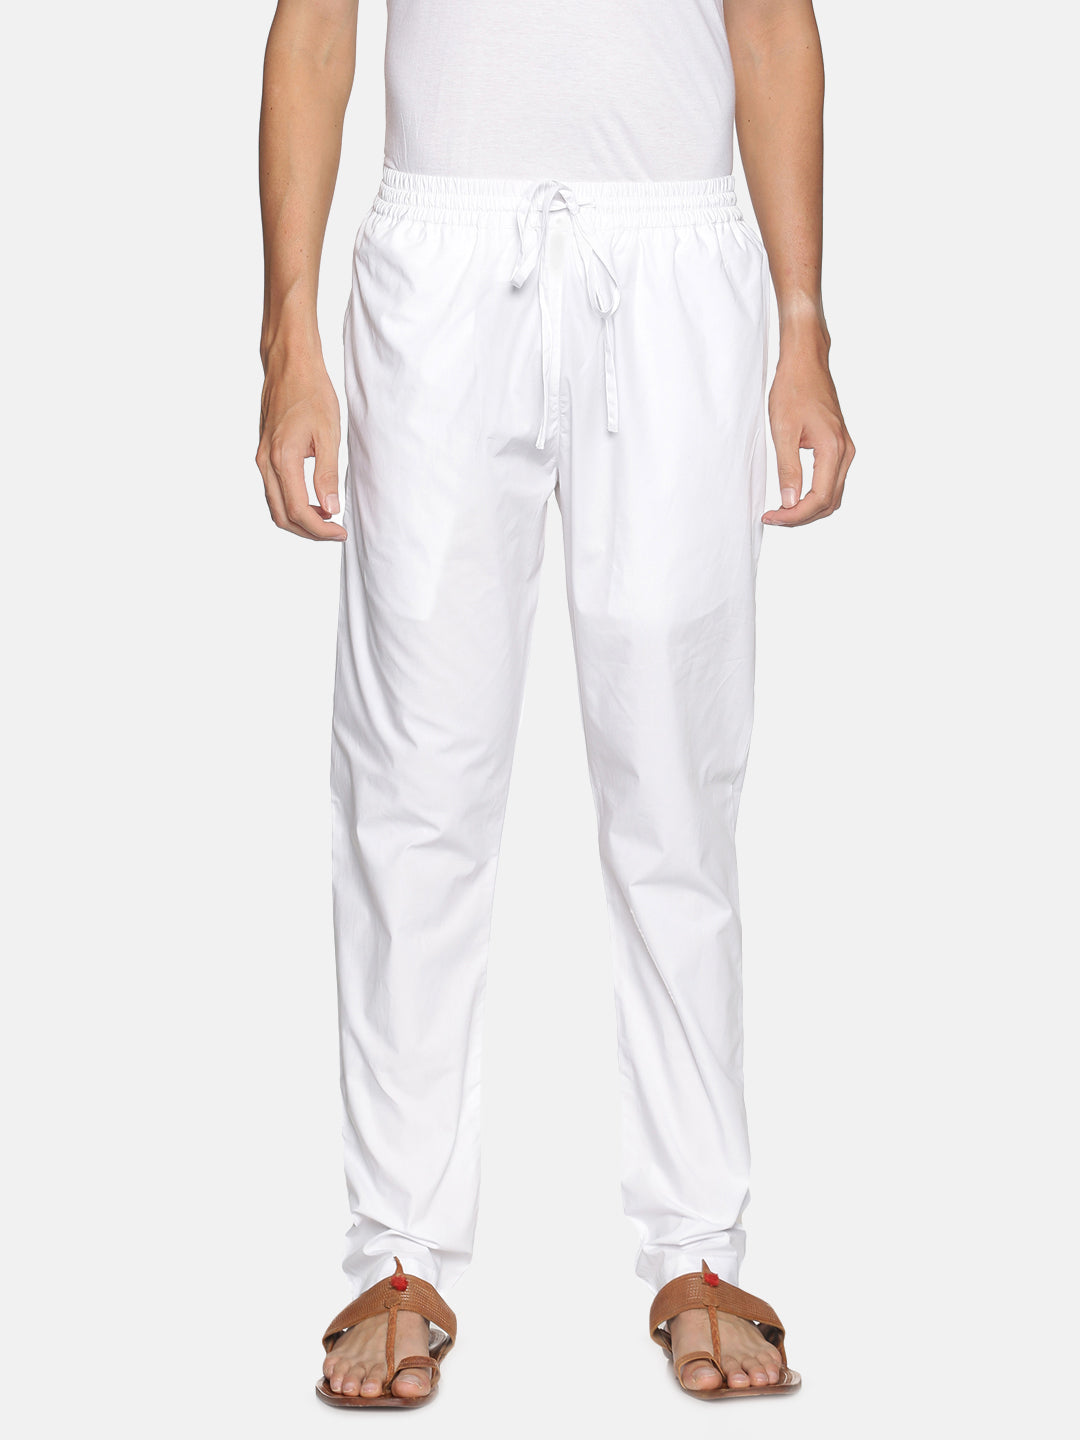 White Cotton Regular Fit  Elasticated Trouser with Drawstring